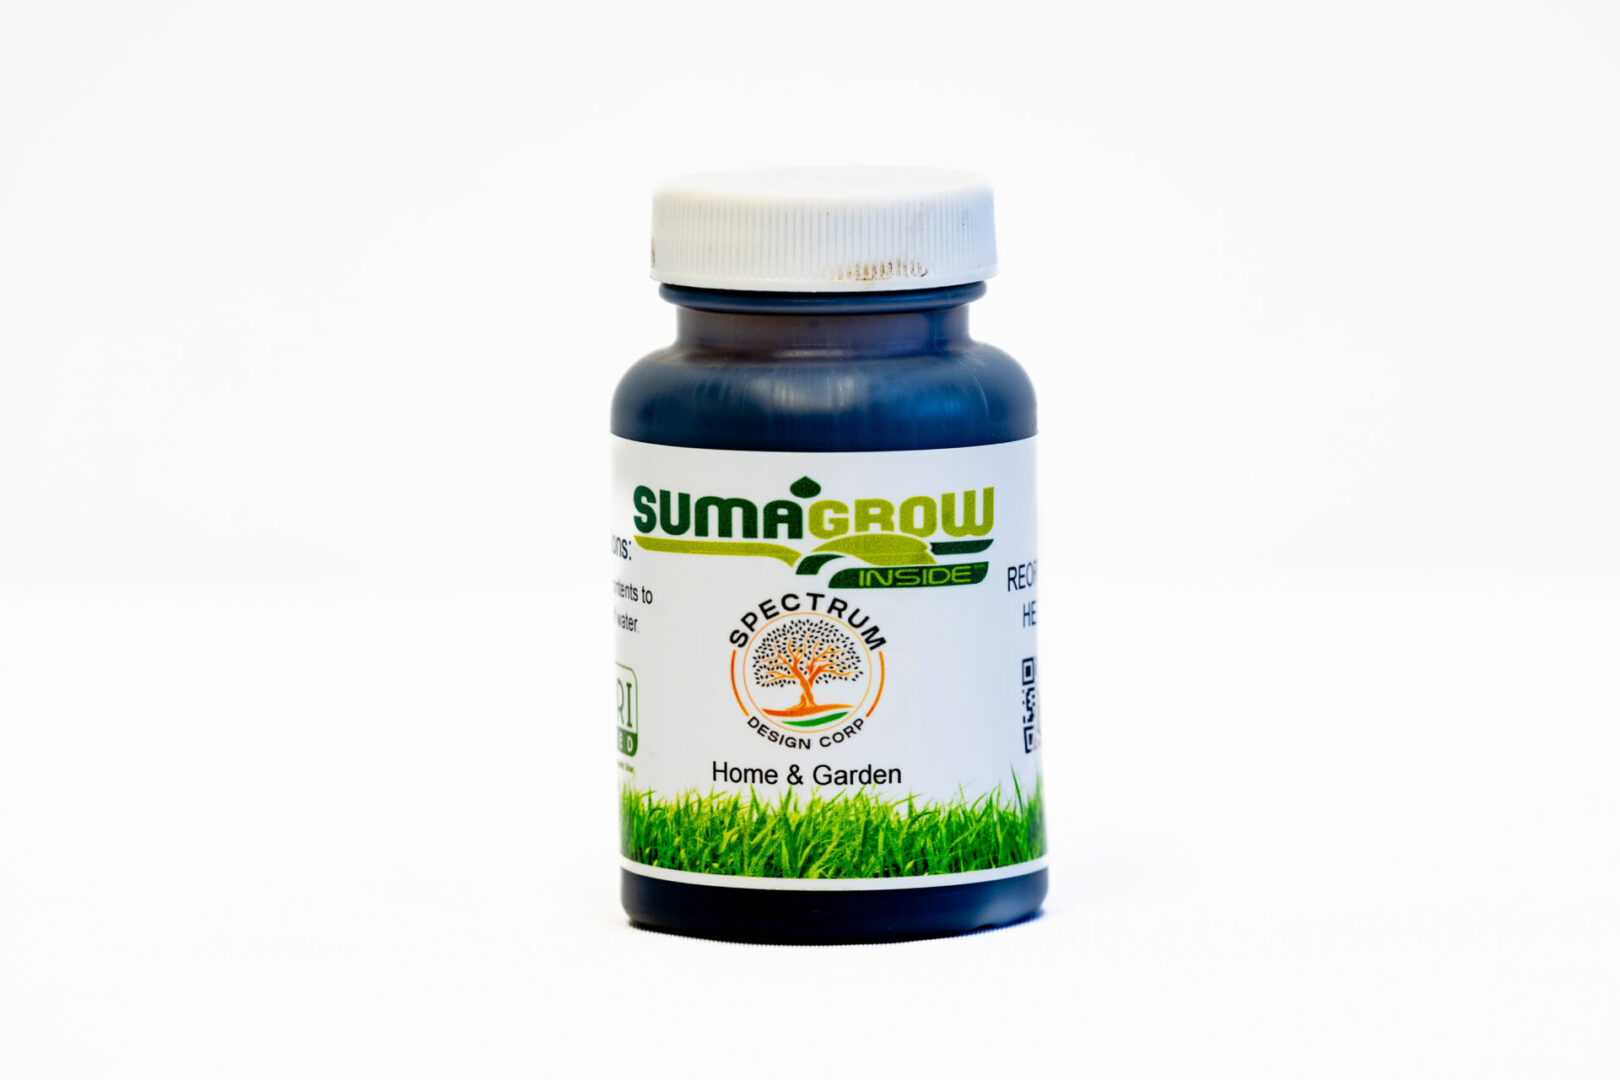 A bottle of sumac grow is shown.